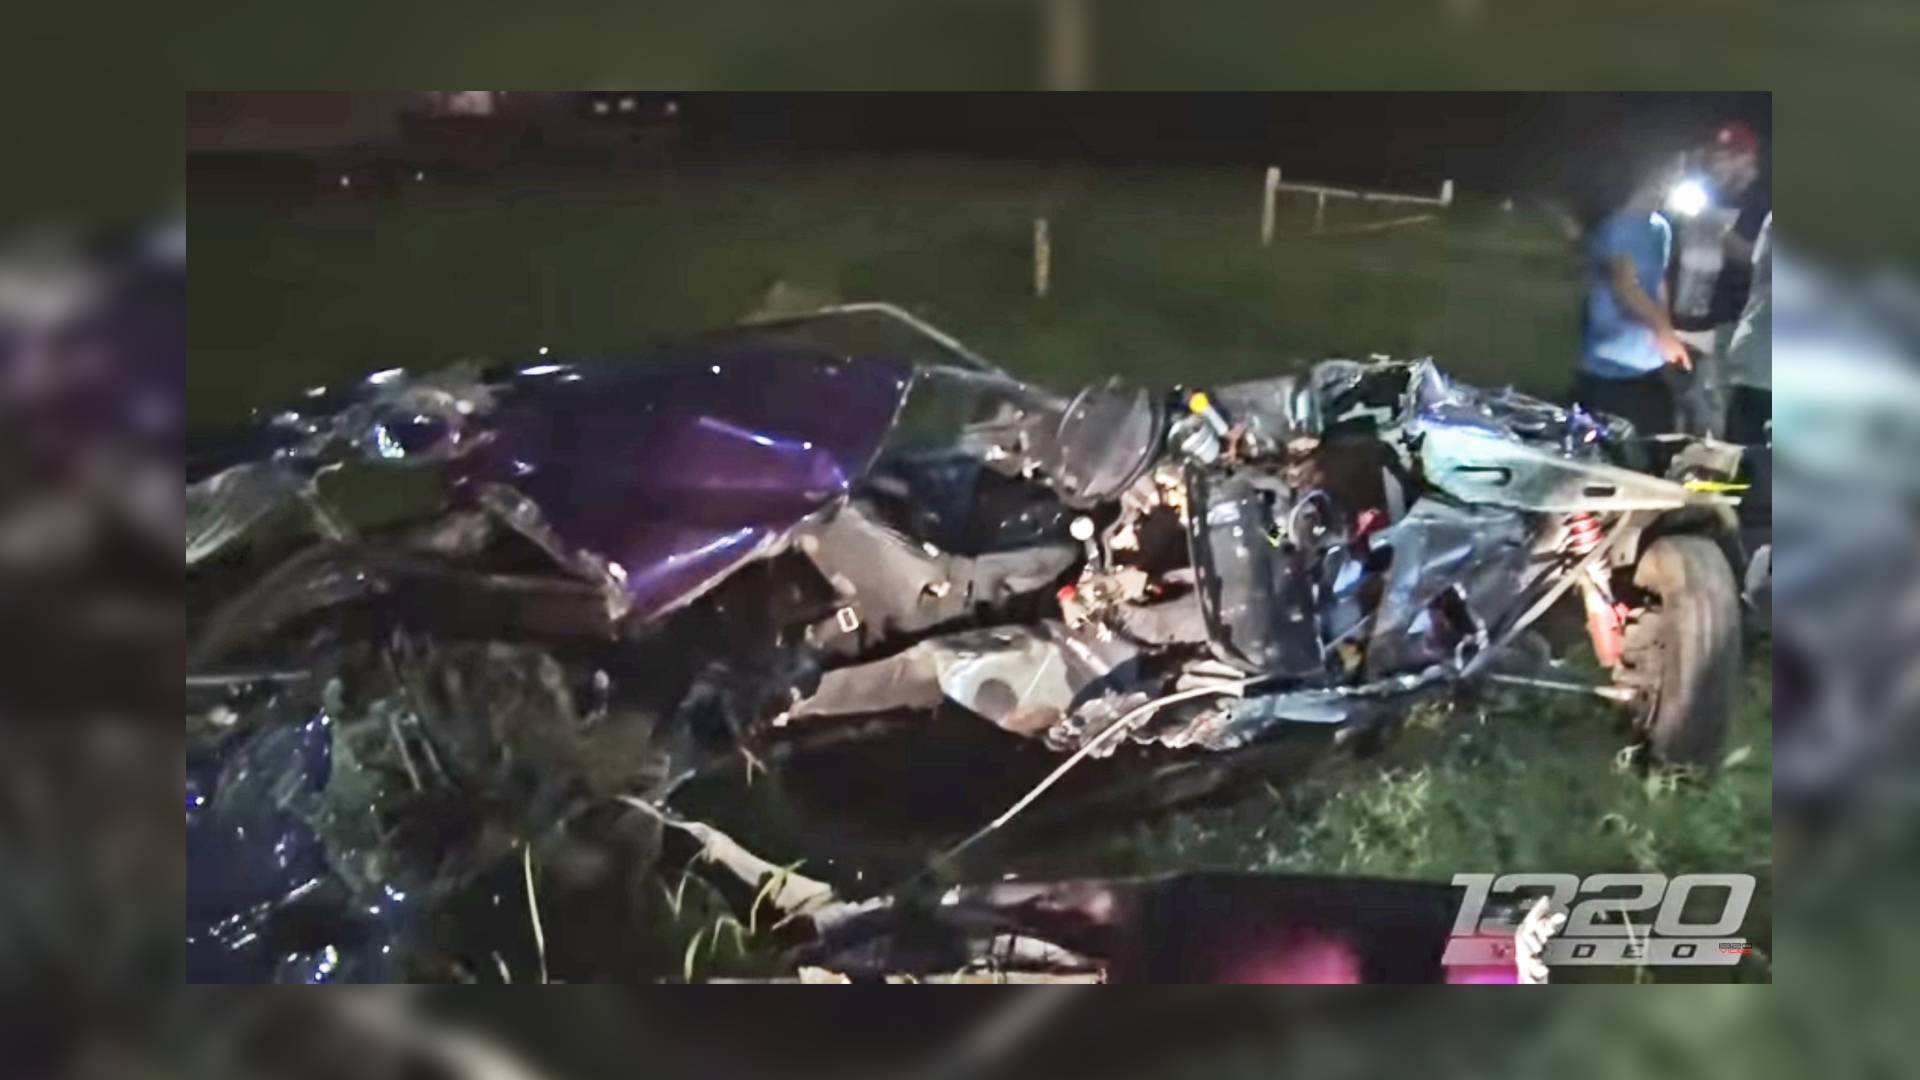 Ford Mustang Ripped In Half During Crazy Street Race Crash